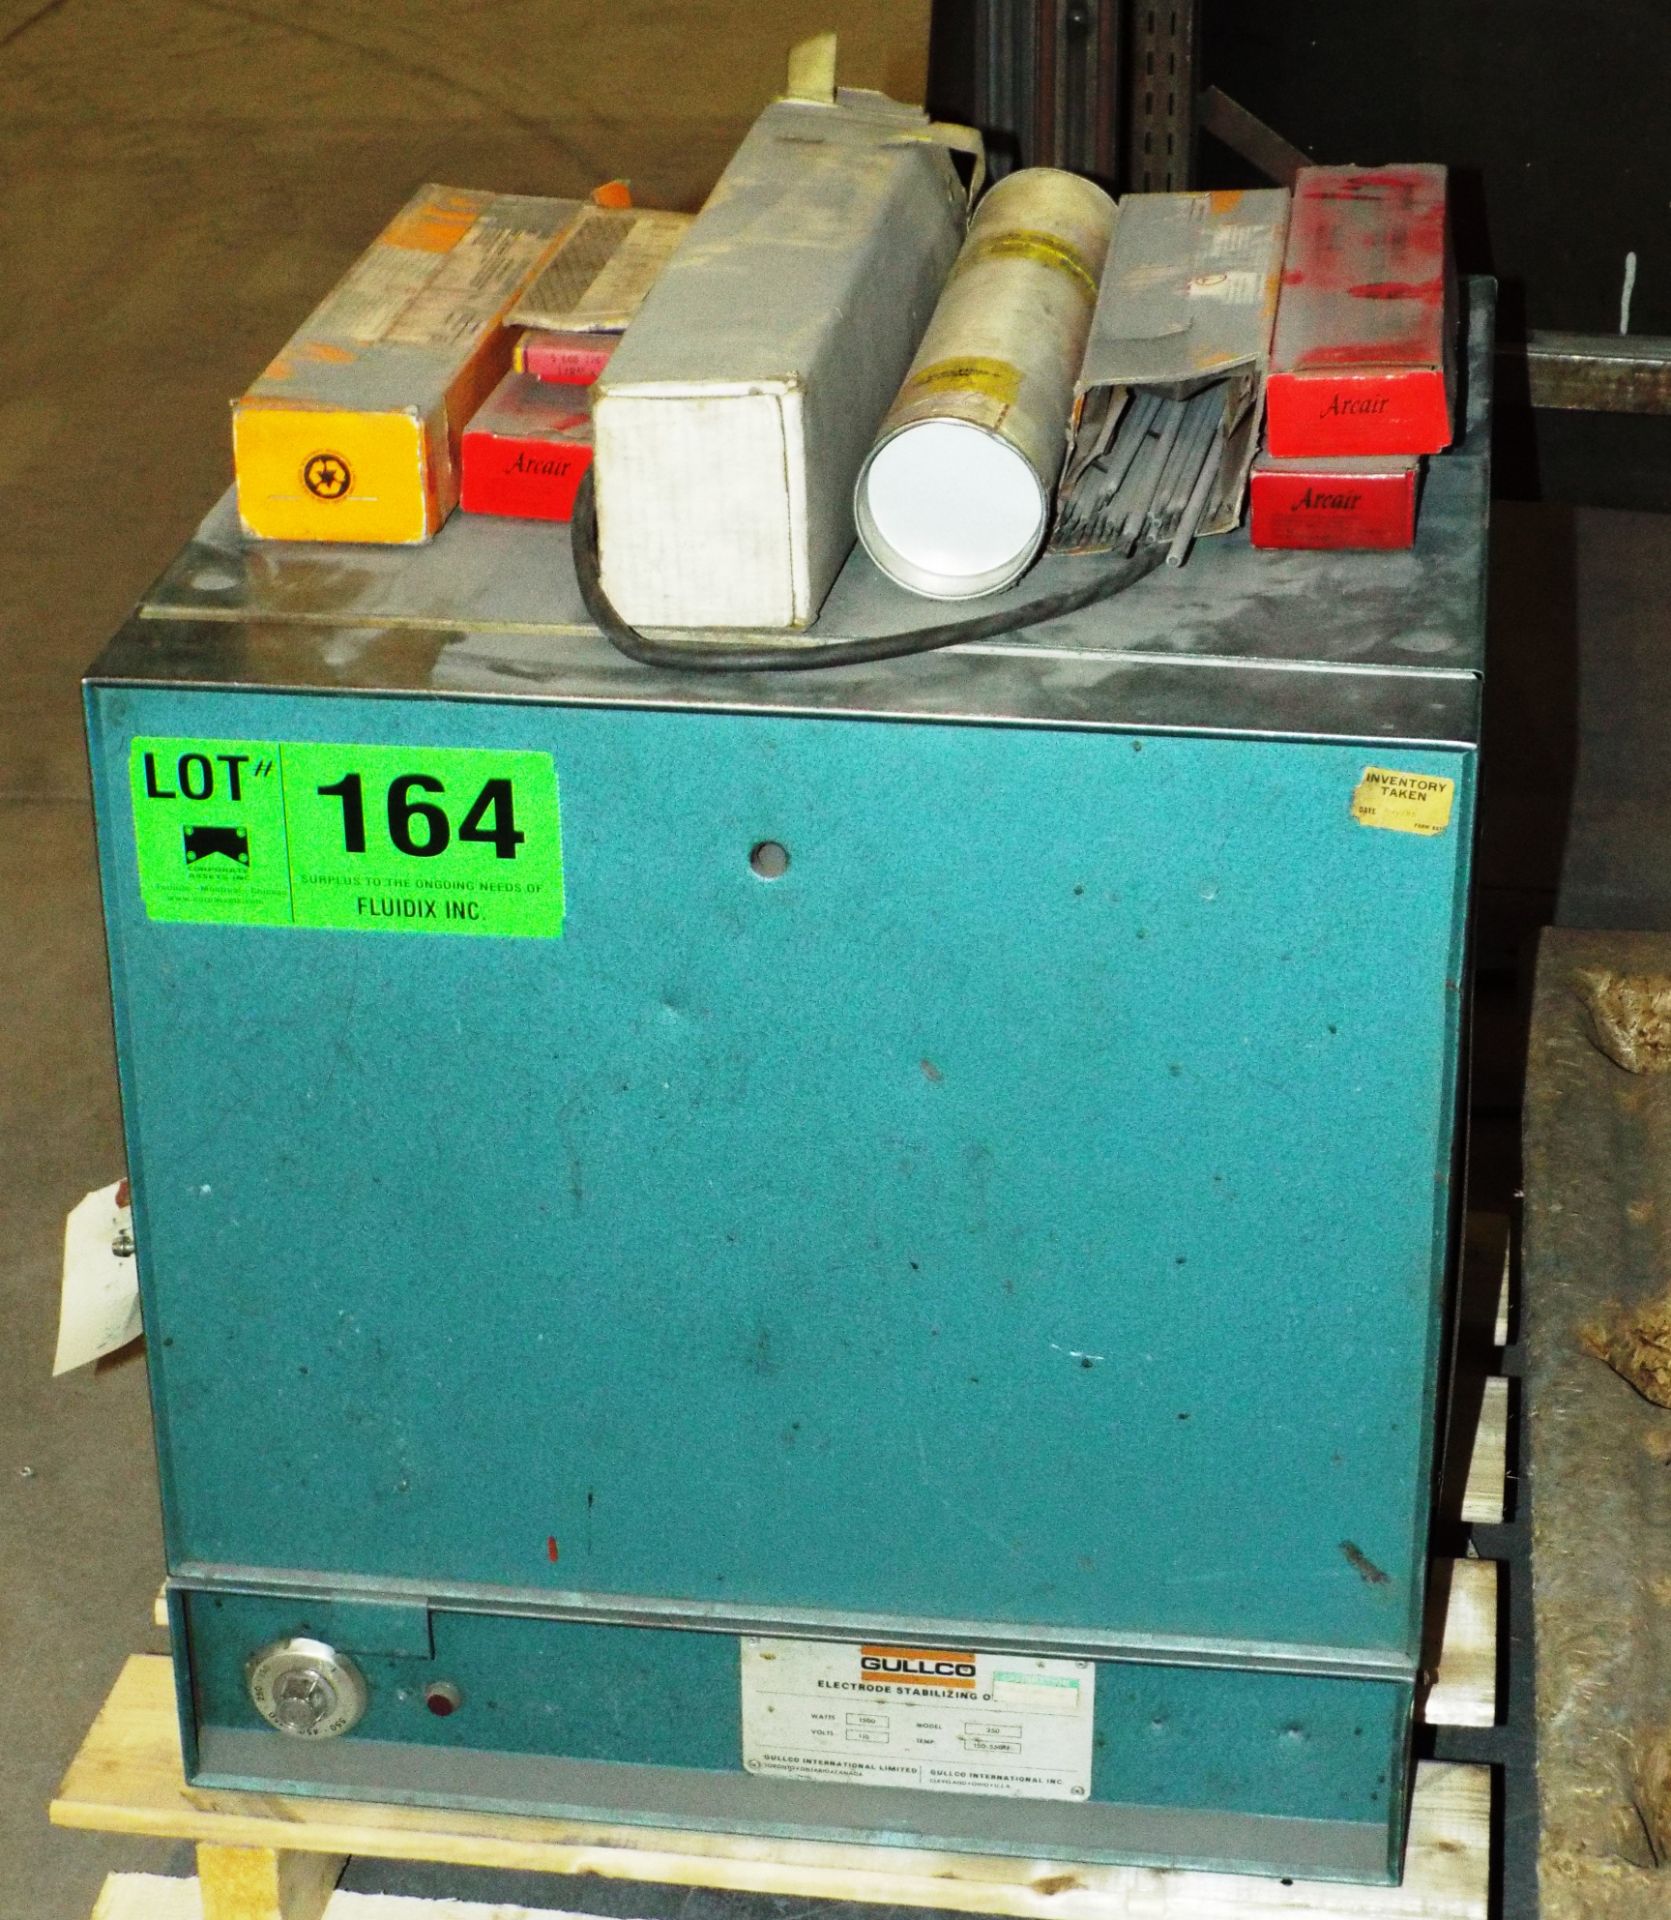 LOT/ GULLCO MODEL 350 ELECTRODE STABILIZING OVEN WITH WELDING ELECTRODES